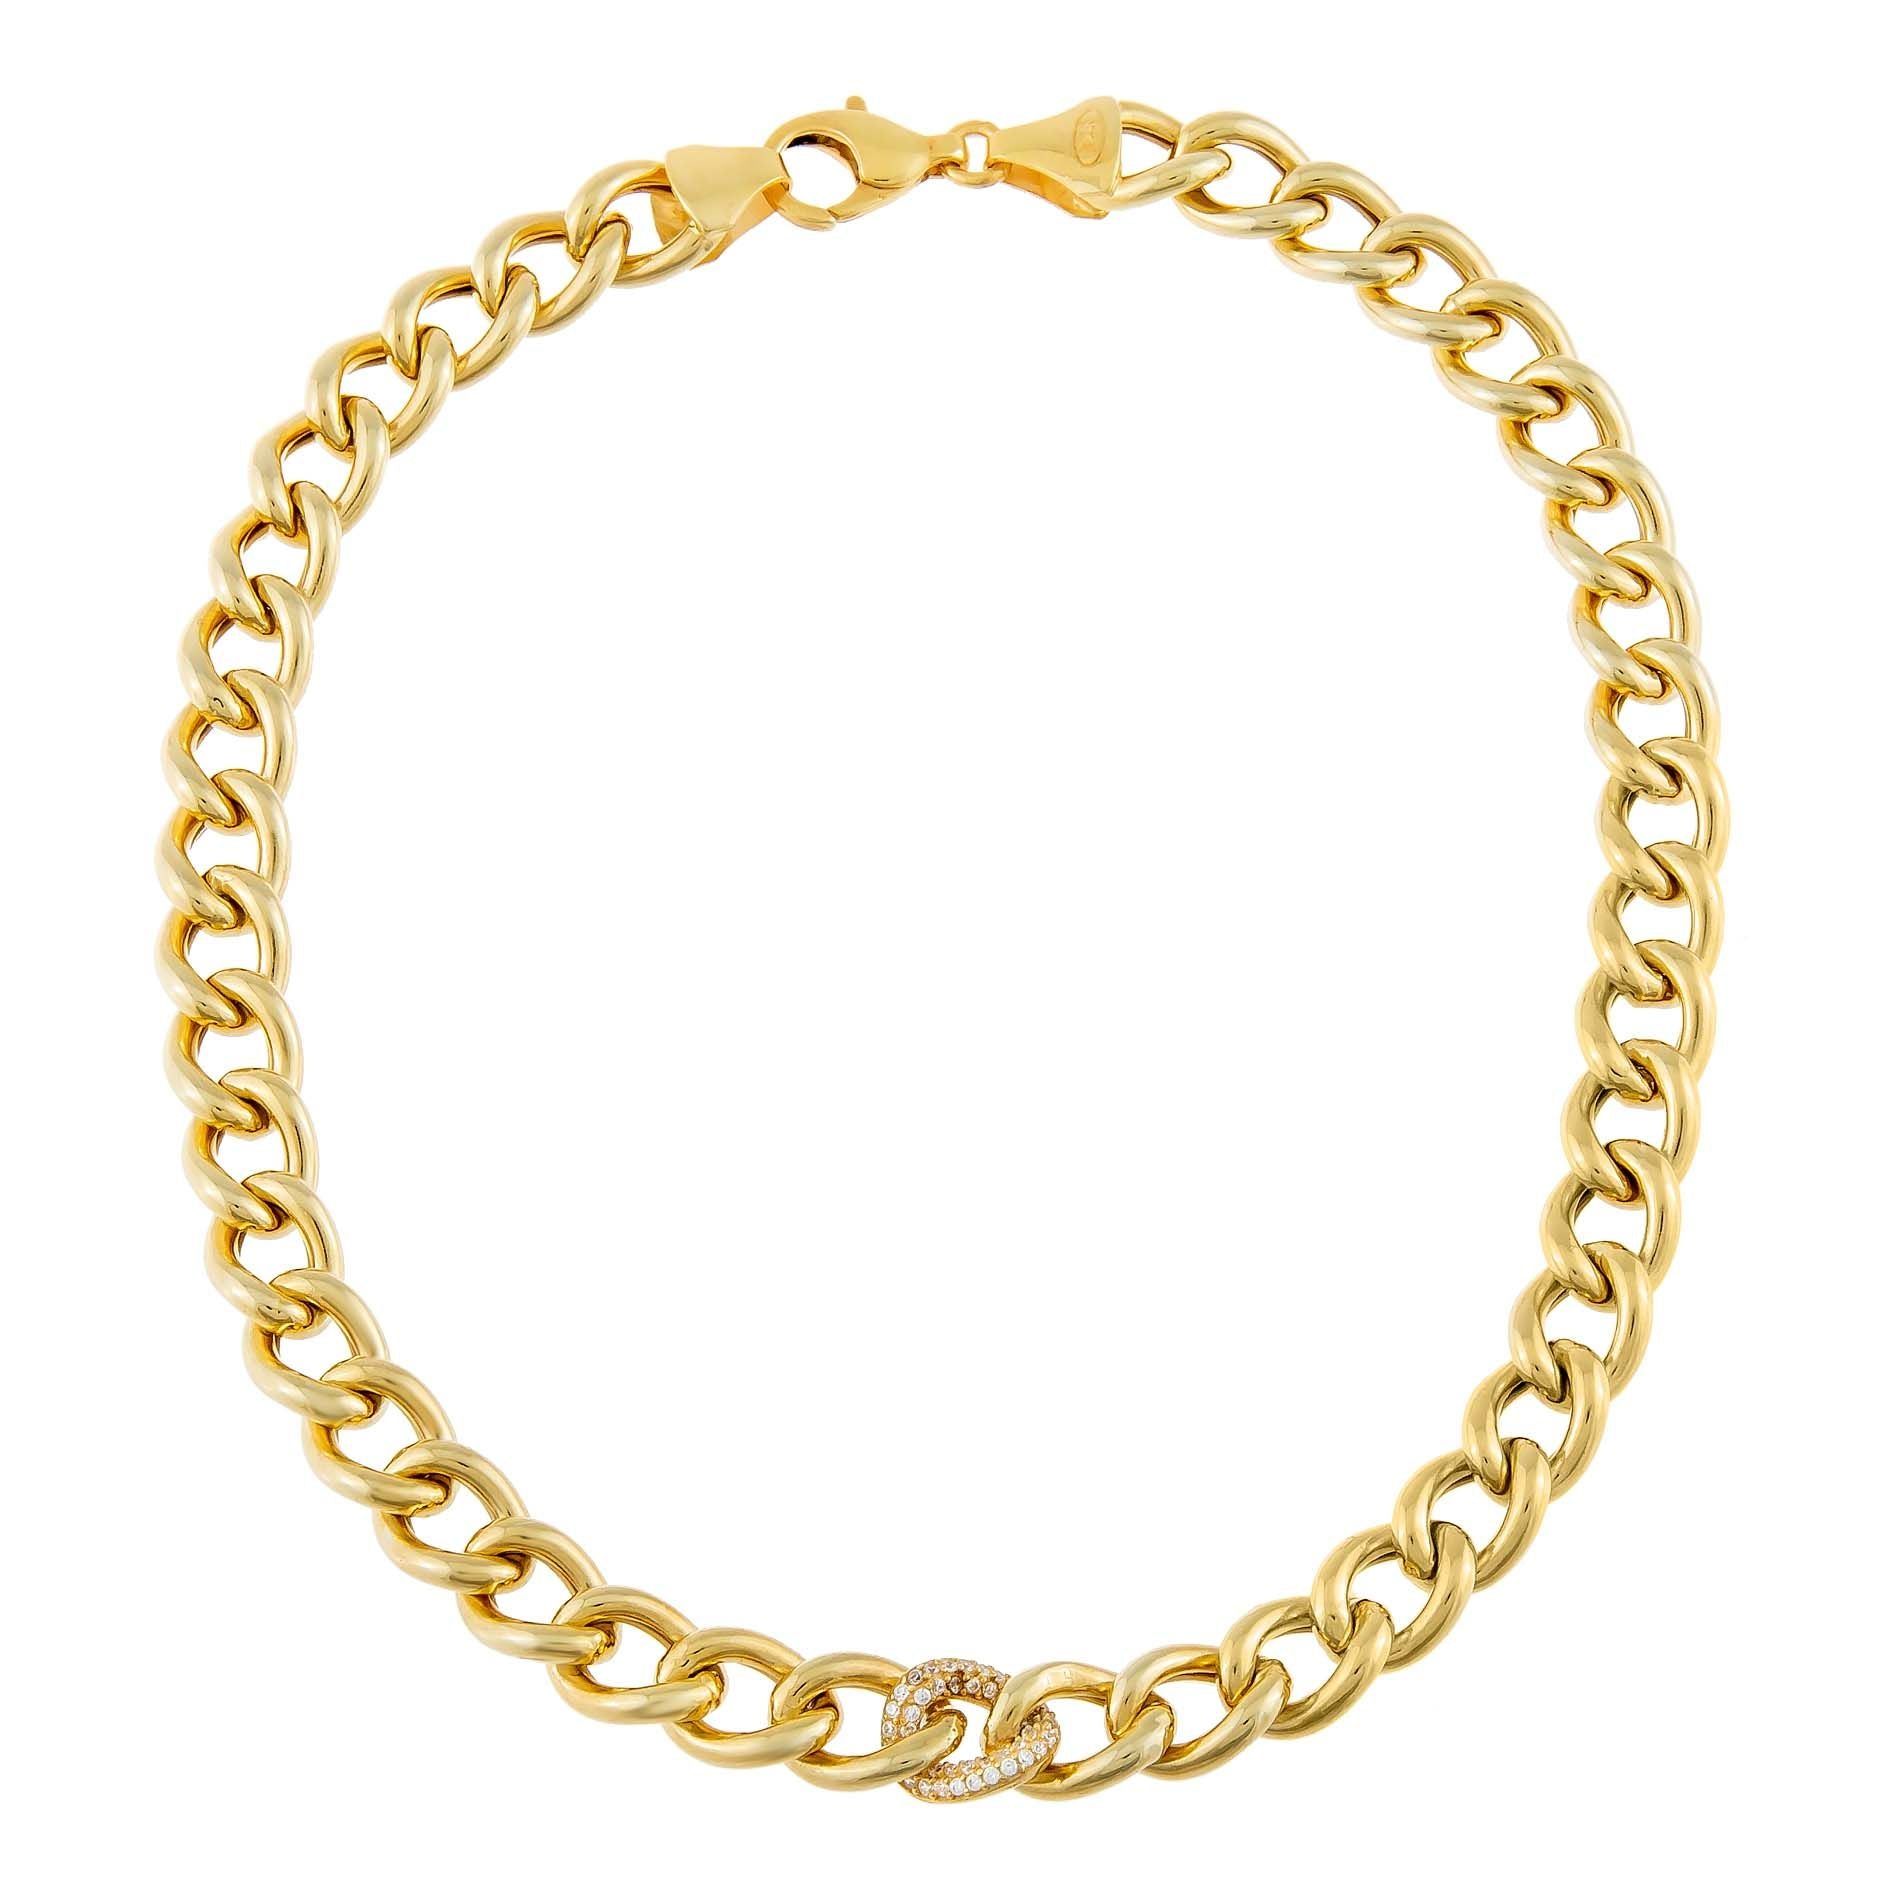 Update more than 71 curb chain gold necklace - POPPY